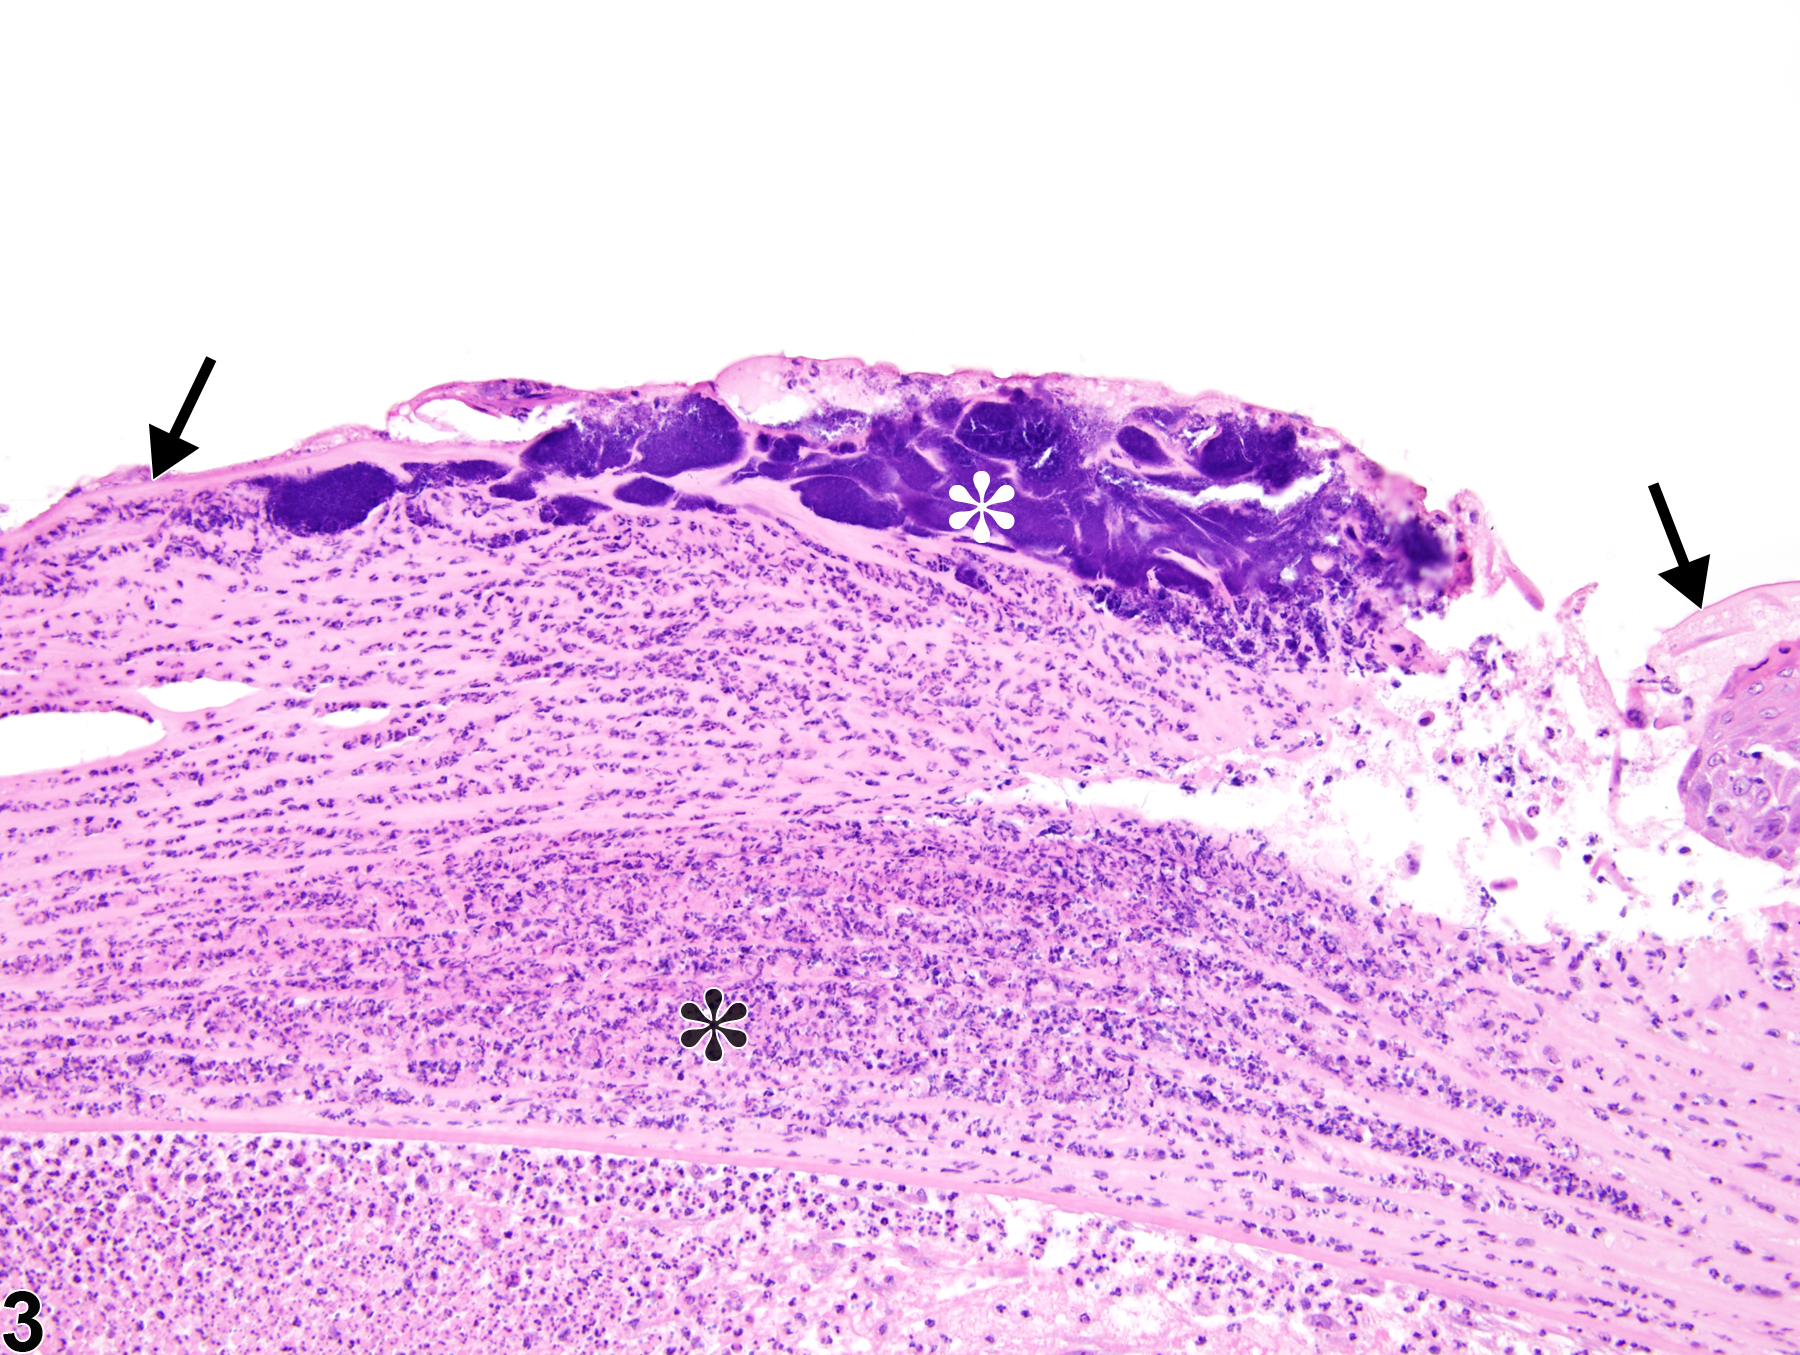 Image of inflammation in the eye from a male F344/N rat in a subchronic study